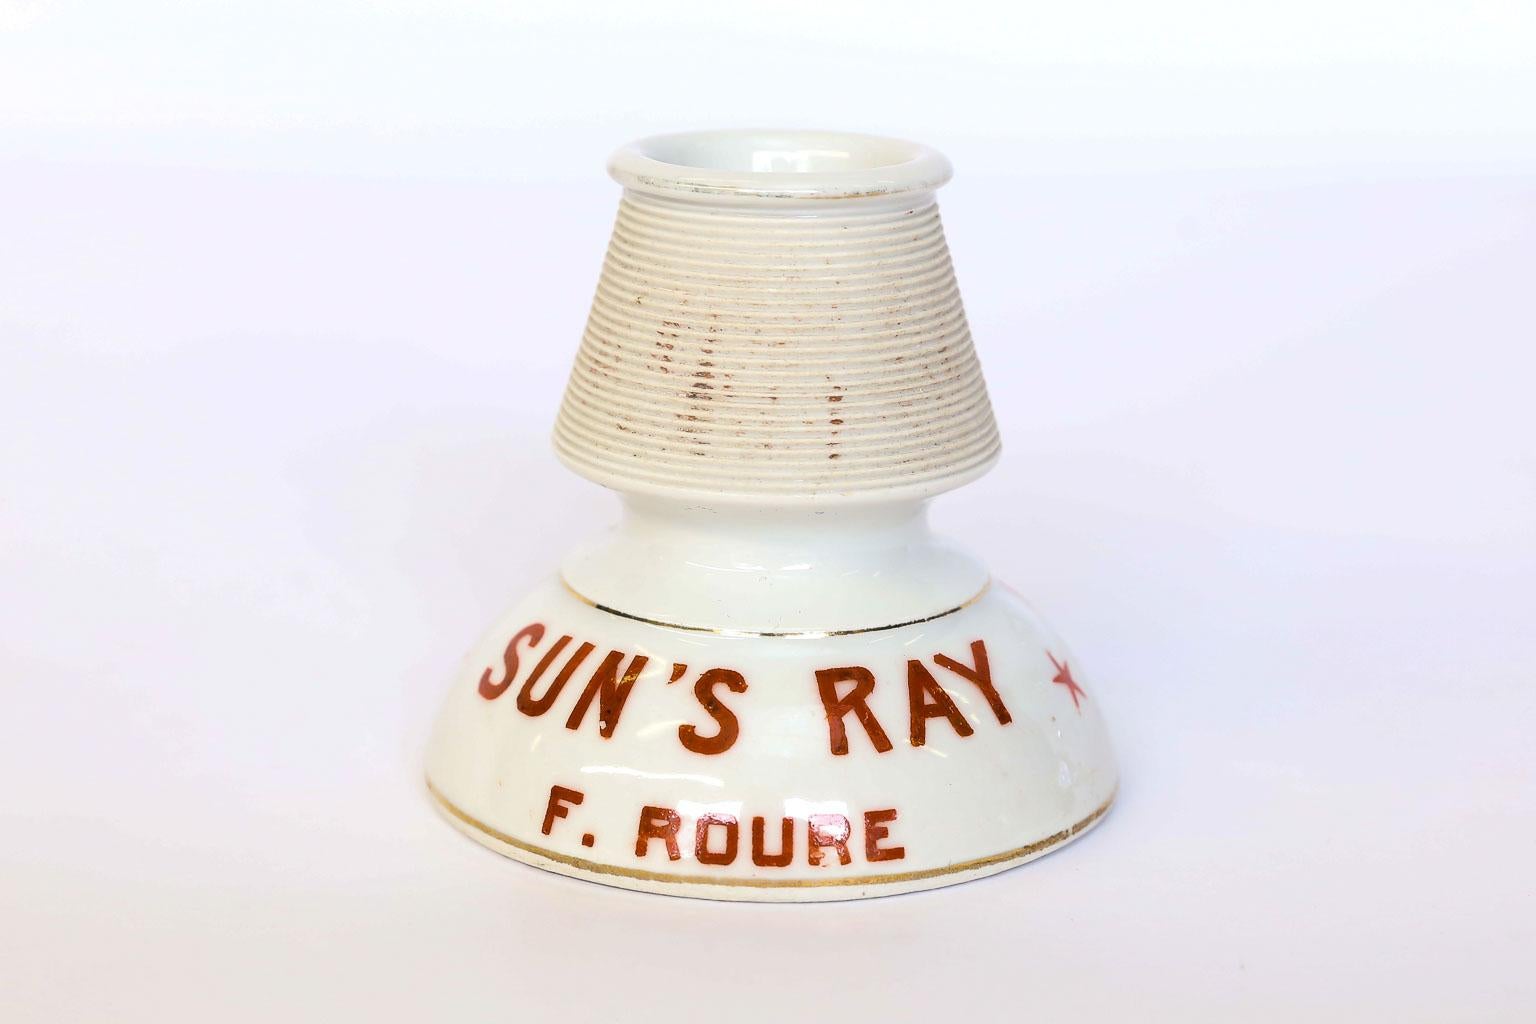 This is a French match holder and striker of white porcelain with burnt orange advertising around the base and two gold stripes. The advertising reads Le Goudron, F. Roure on one side and Sun's Ray, F. Roure on the other side. The maker's mark in